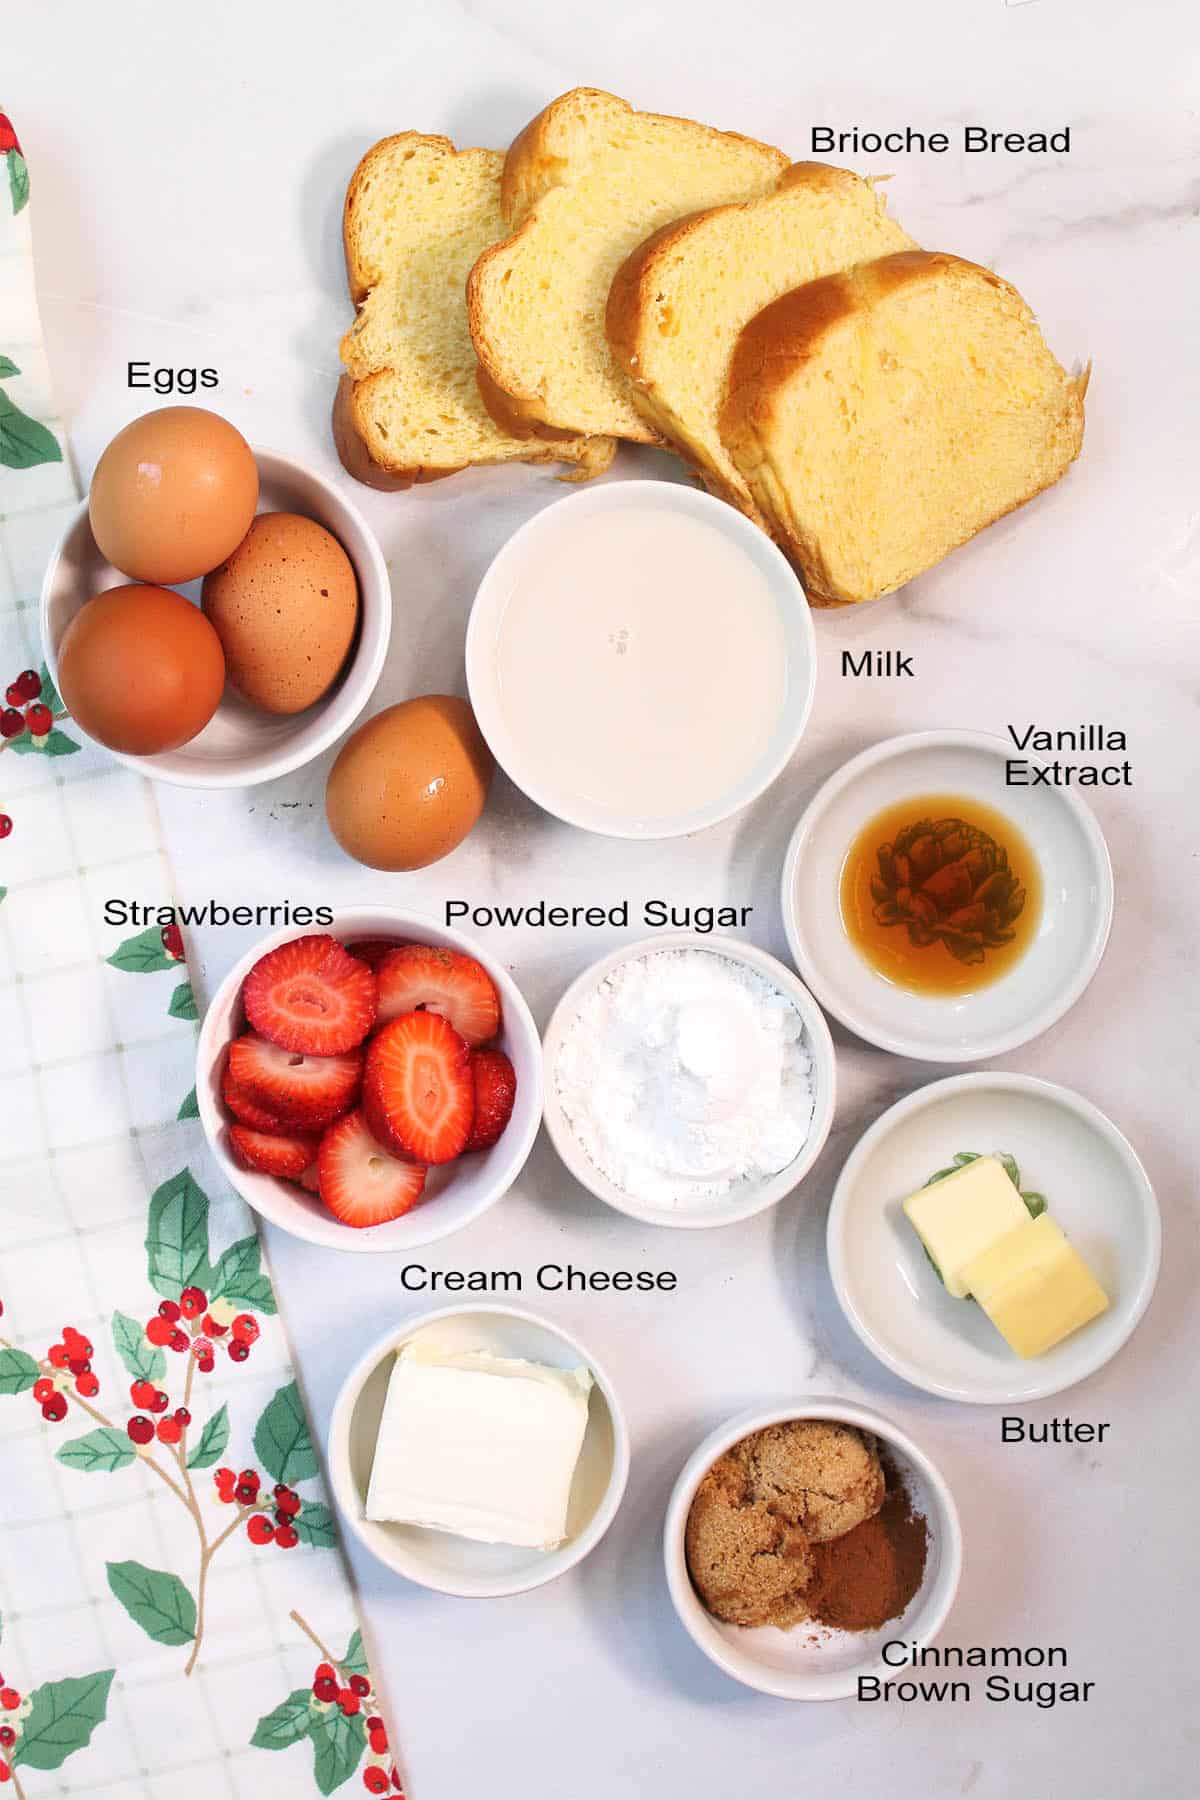 Ingredients for cream cheese stuffed french toast.